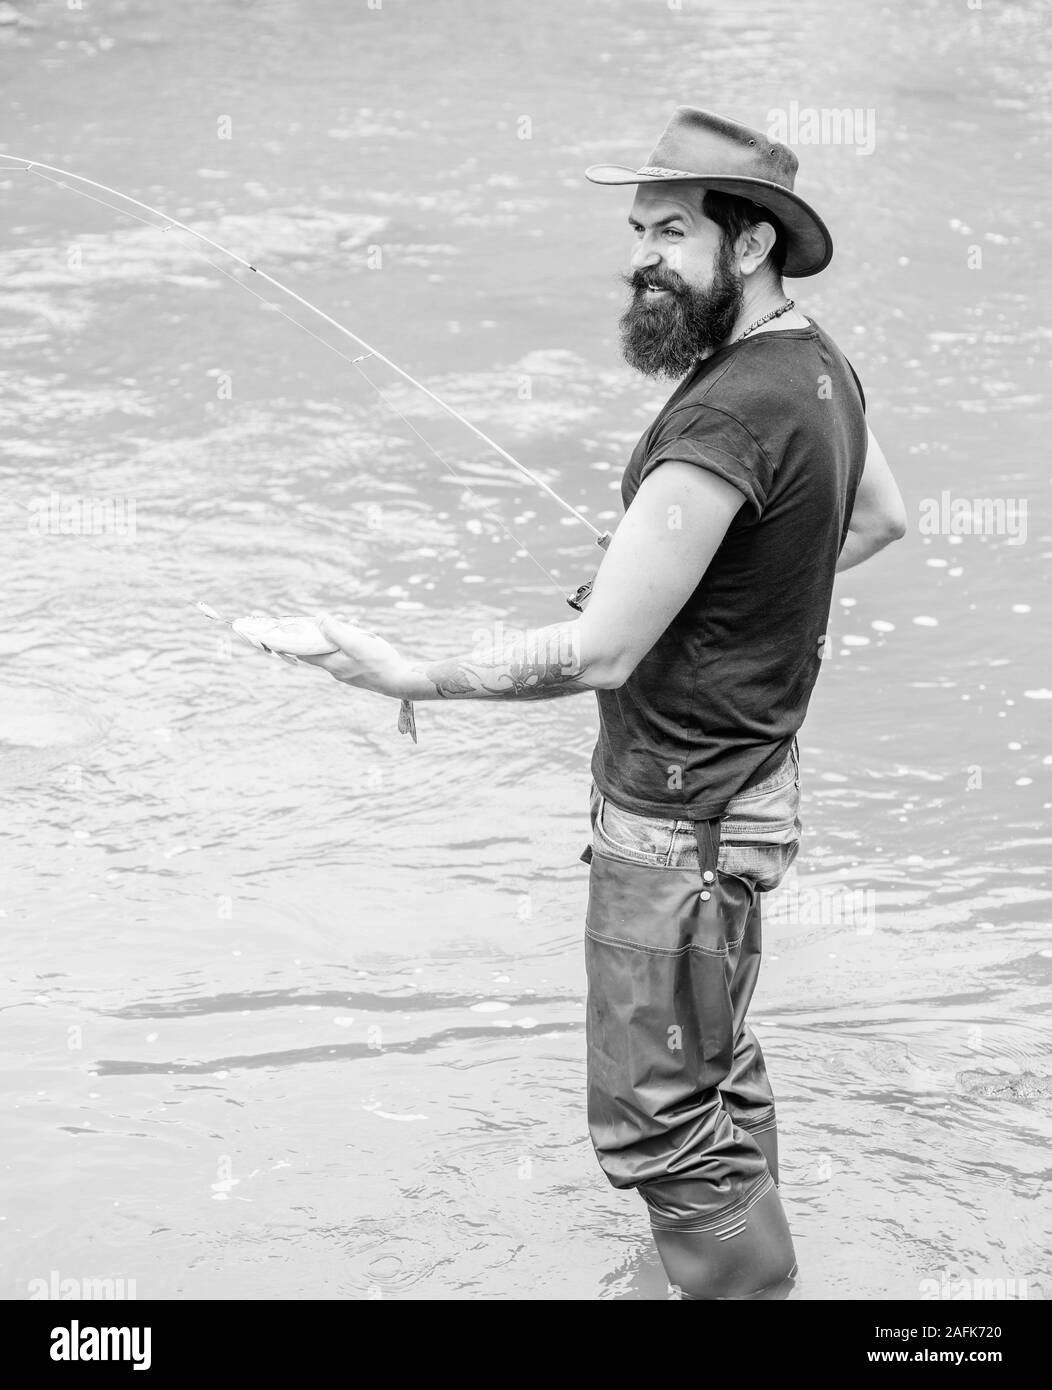 Fun of fishing is catching. Fisher with fishing equipment. Fish on hook. Leisure in wild nature. Fishing masculine hobby. Brutal man wear rubber boots stand in river water. Fisher weekend activity. Stock Photo